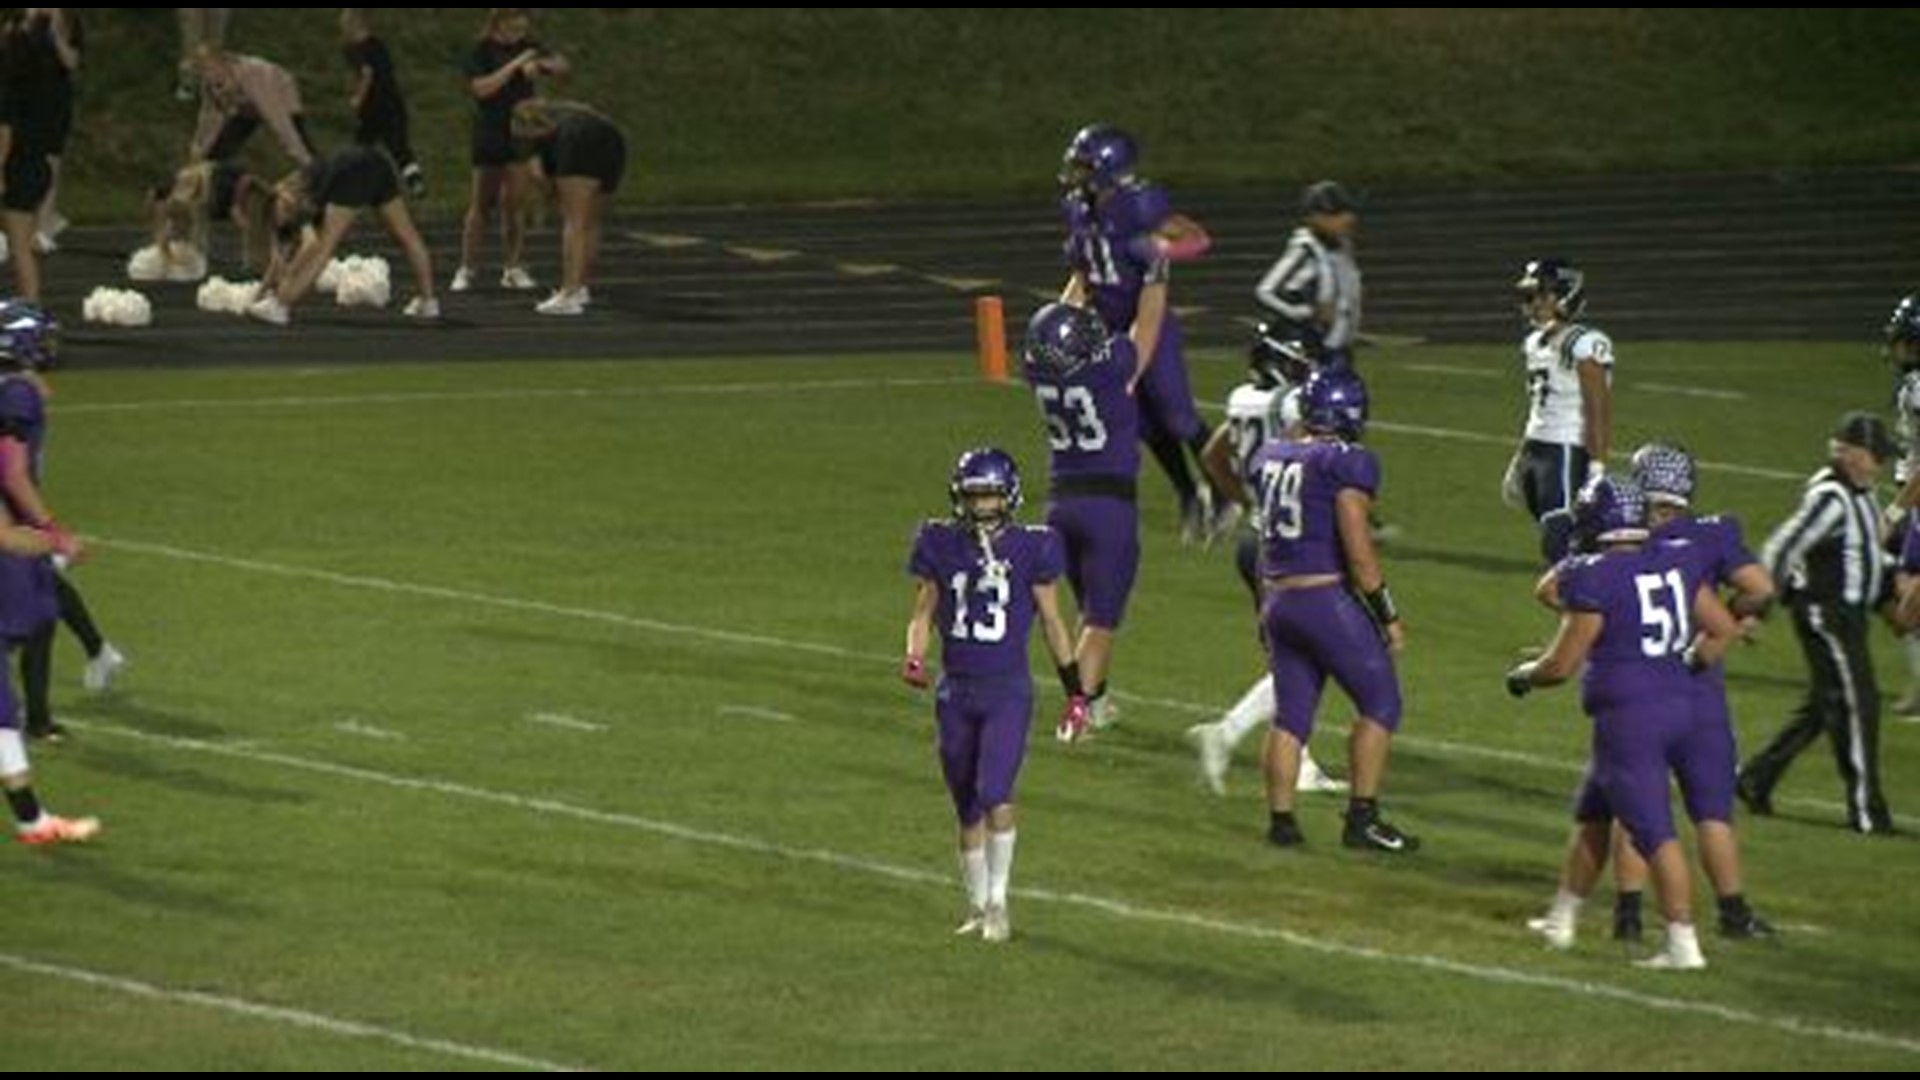 Arvada West trailed 21-10 at halftime before scoring 14 unanswered points to beat Columbine 24-21.